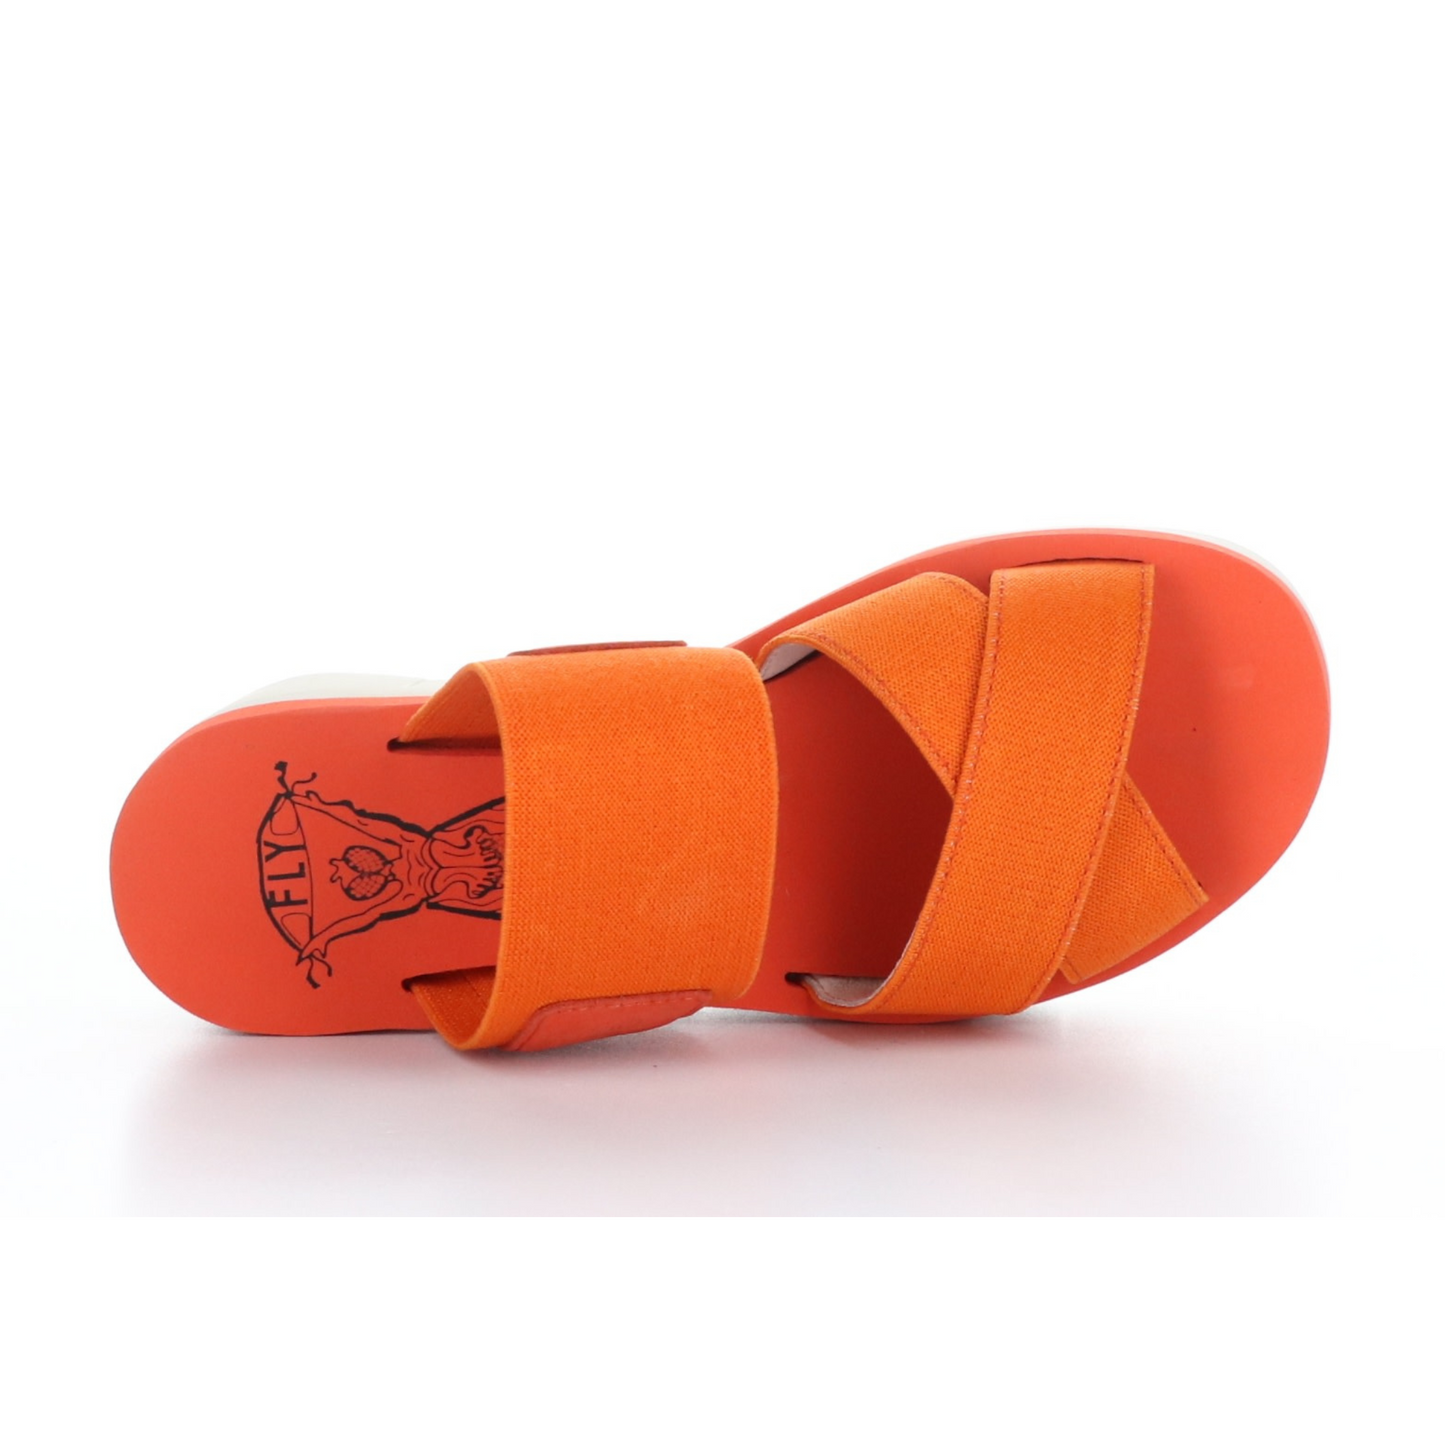 A top view of a red-orange platform wedged sandal.